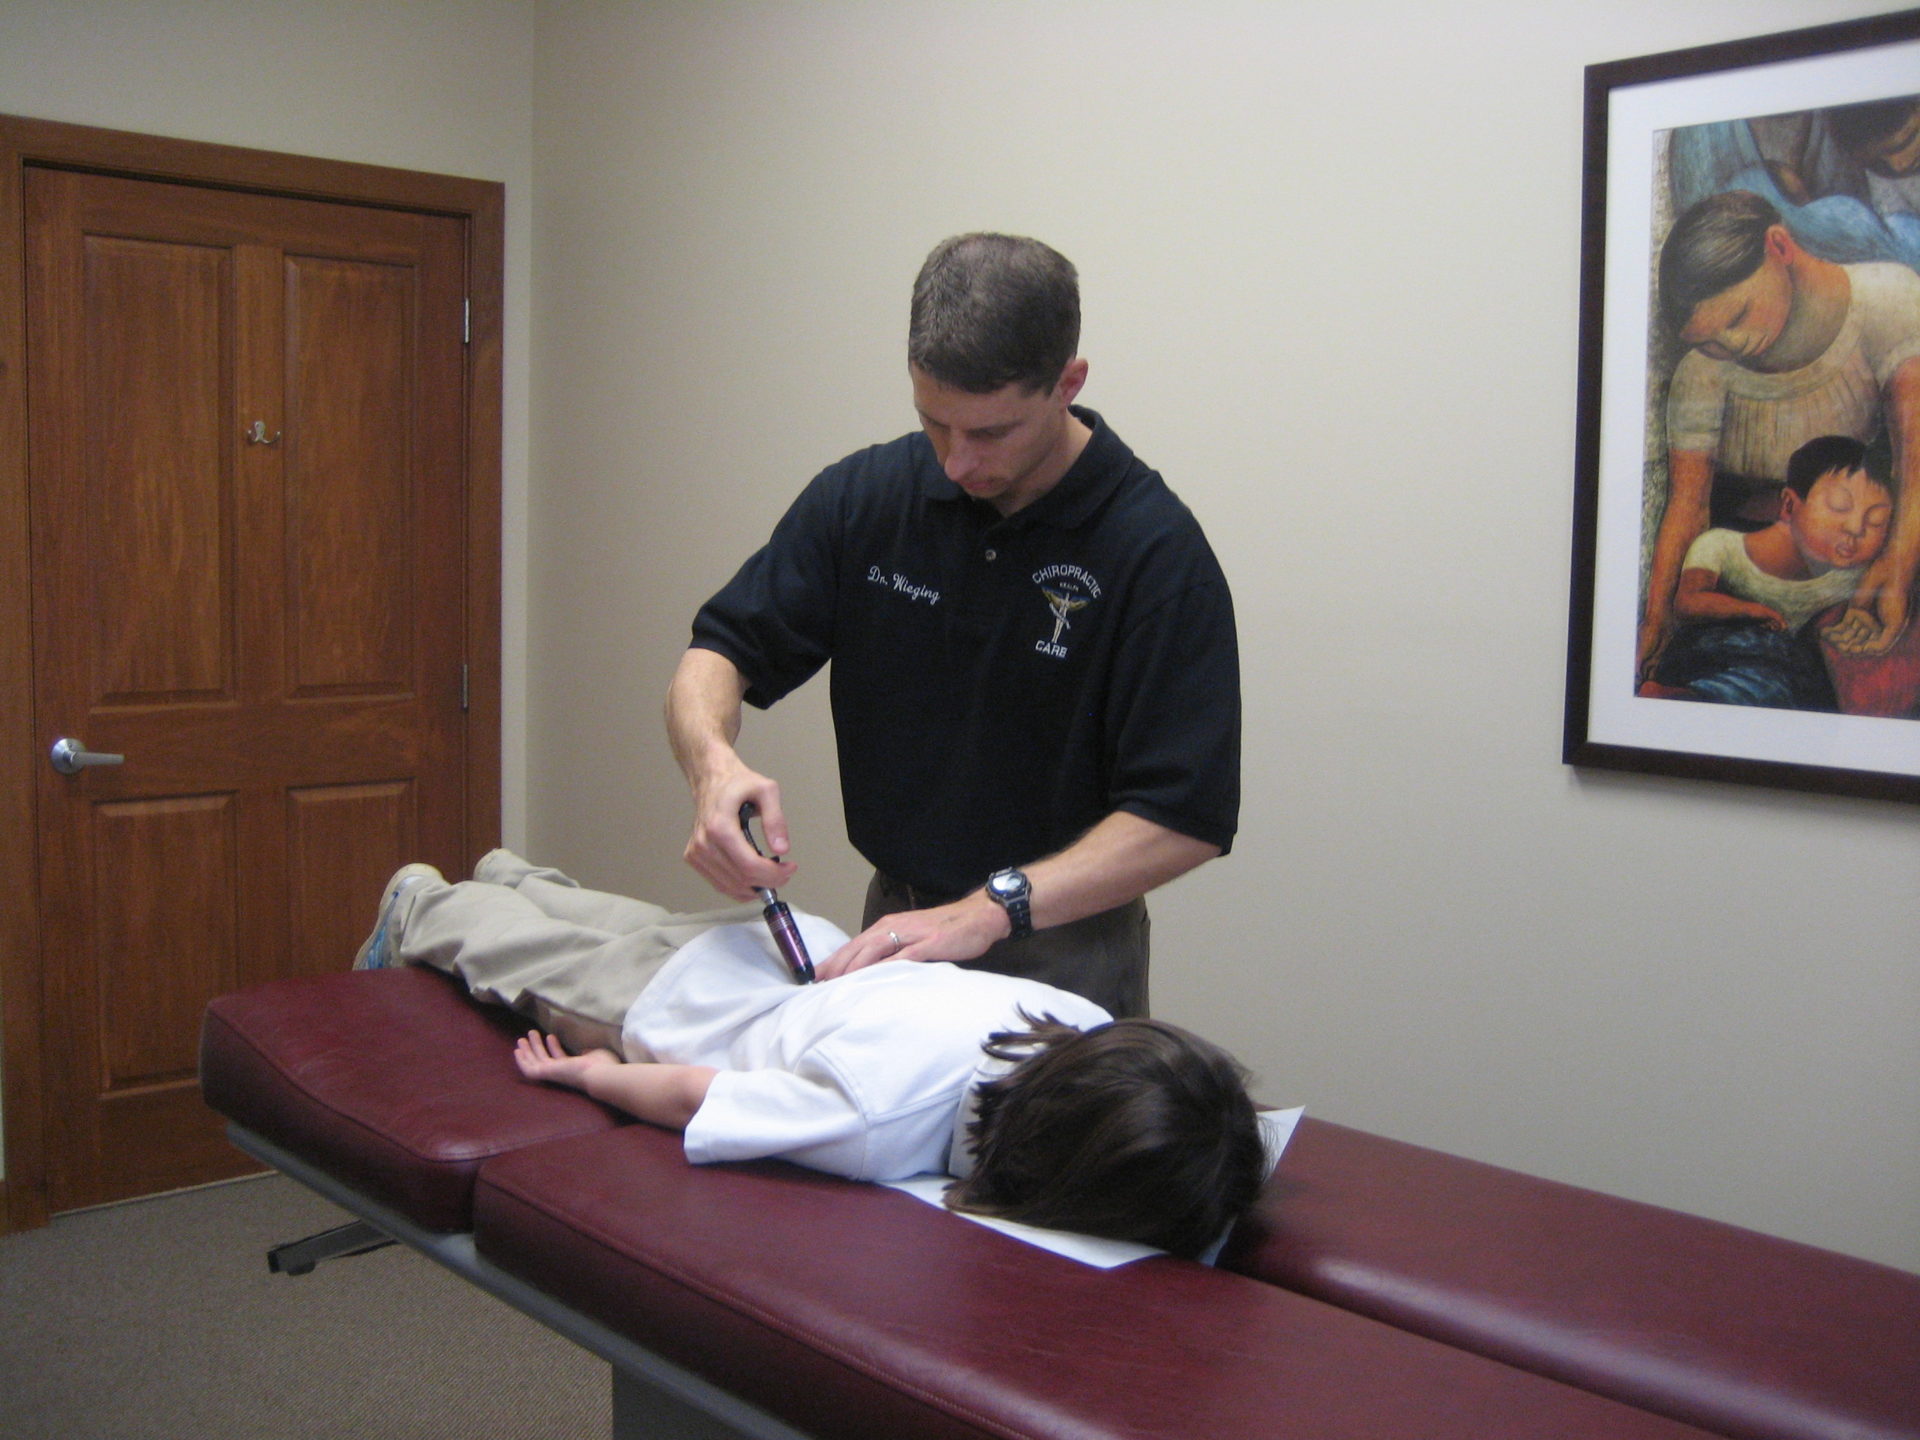 A child lying on a chiropractic table while a chiropractor adjusts his back.